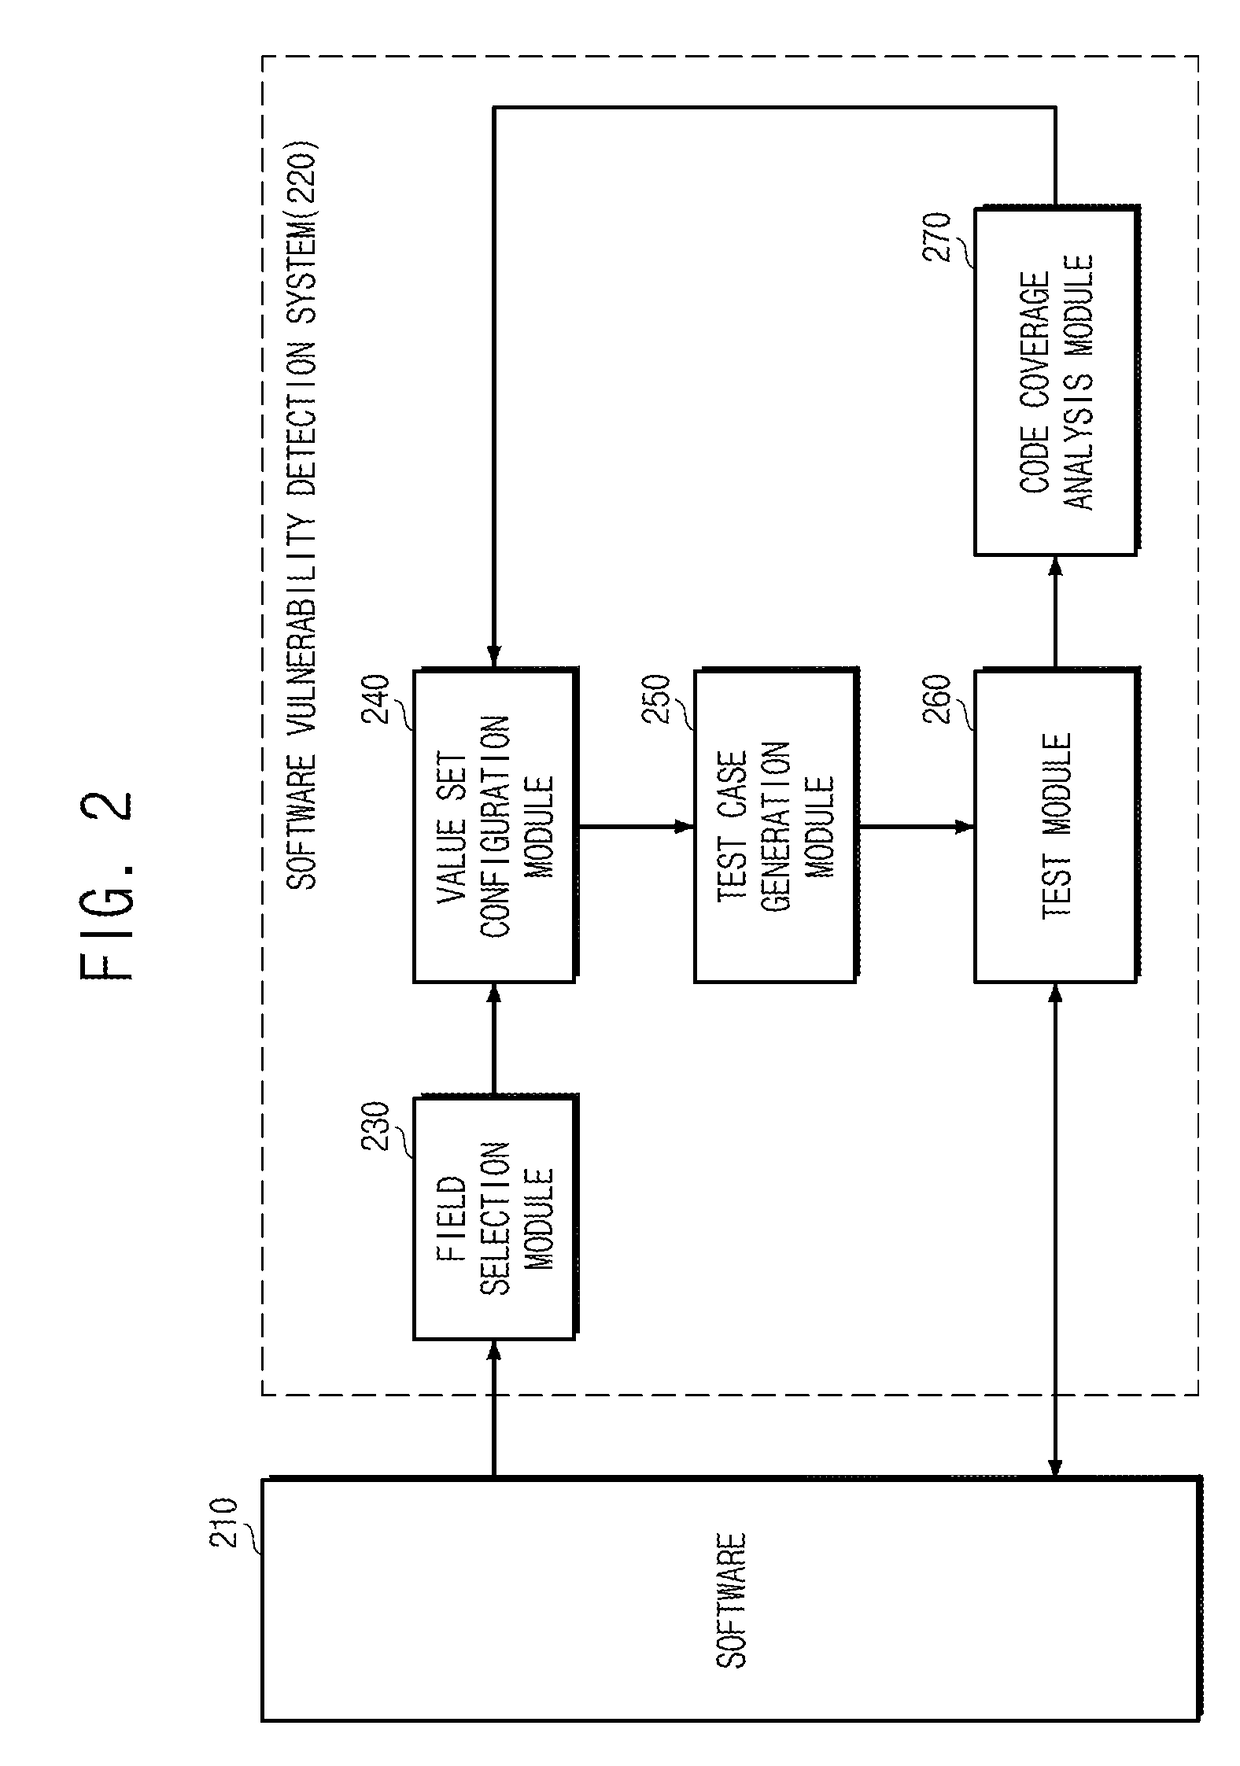 Method and system for detecting vulnerabilities of communication protocol software